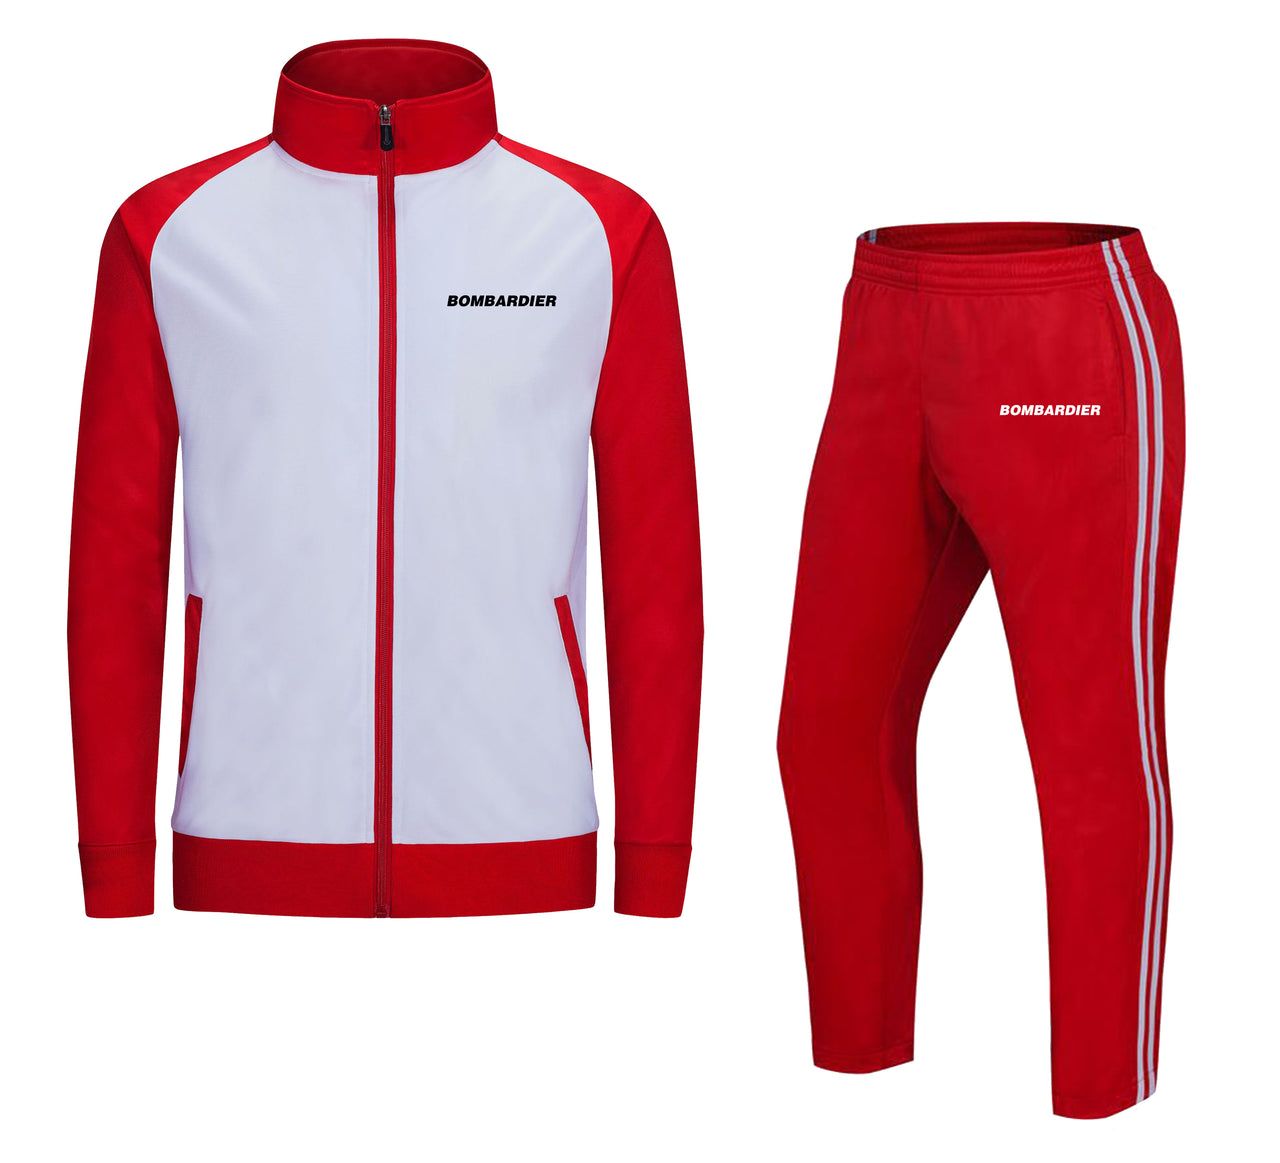 Bombardier & Text Designed "CHILDREN" Tracksuits